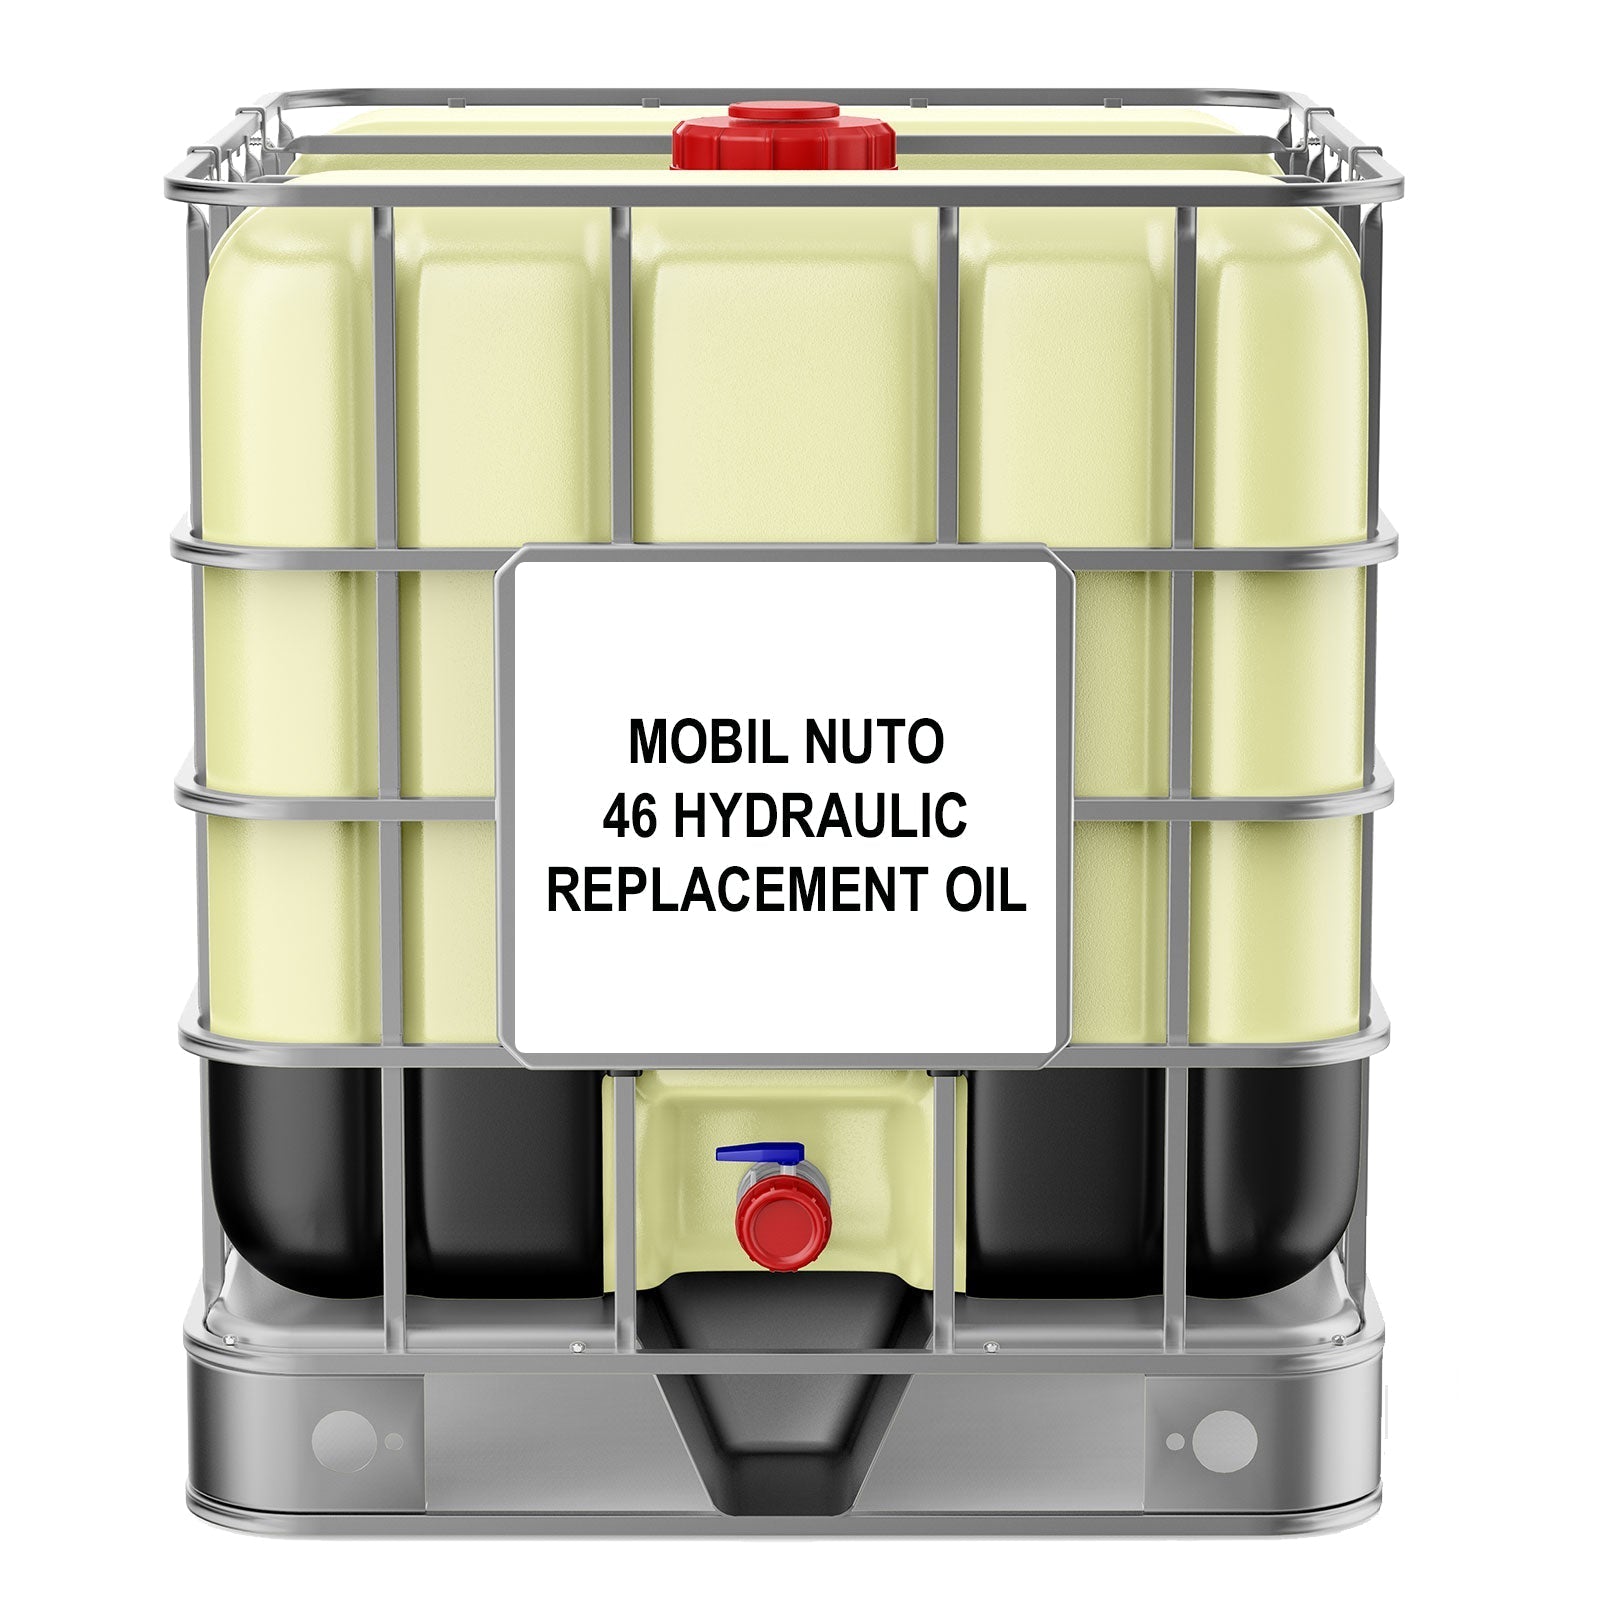 Mobil Nuto H 46 Hydraulic Replacement Oil by RDT - 275 Gallon Tote